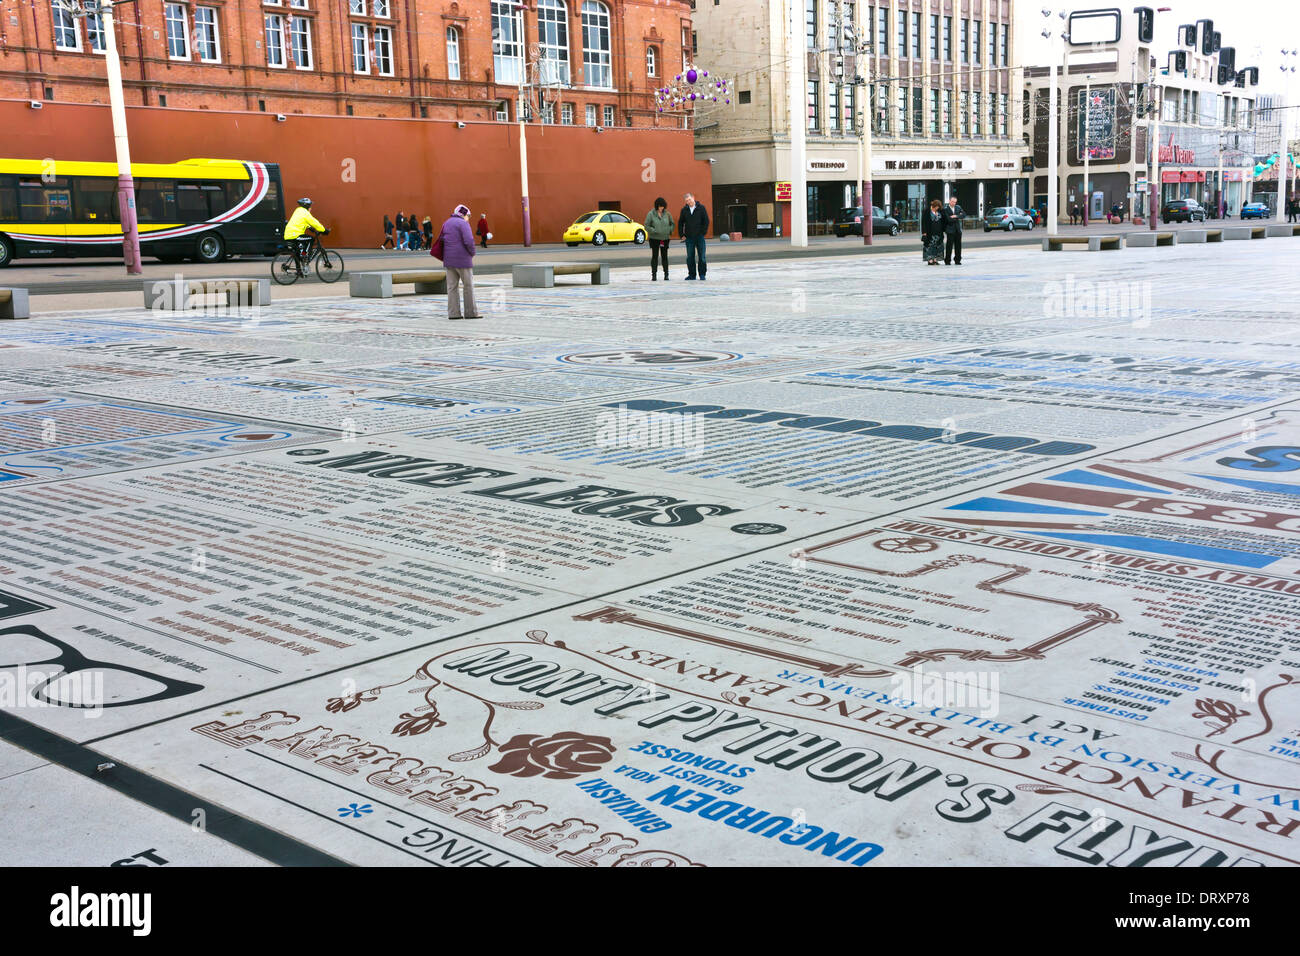 The comedy carpet one of Britain's largest pieces of public art at the new Festival Headland in Blackpool, England. Stock Photo